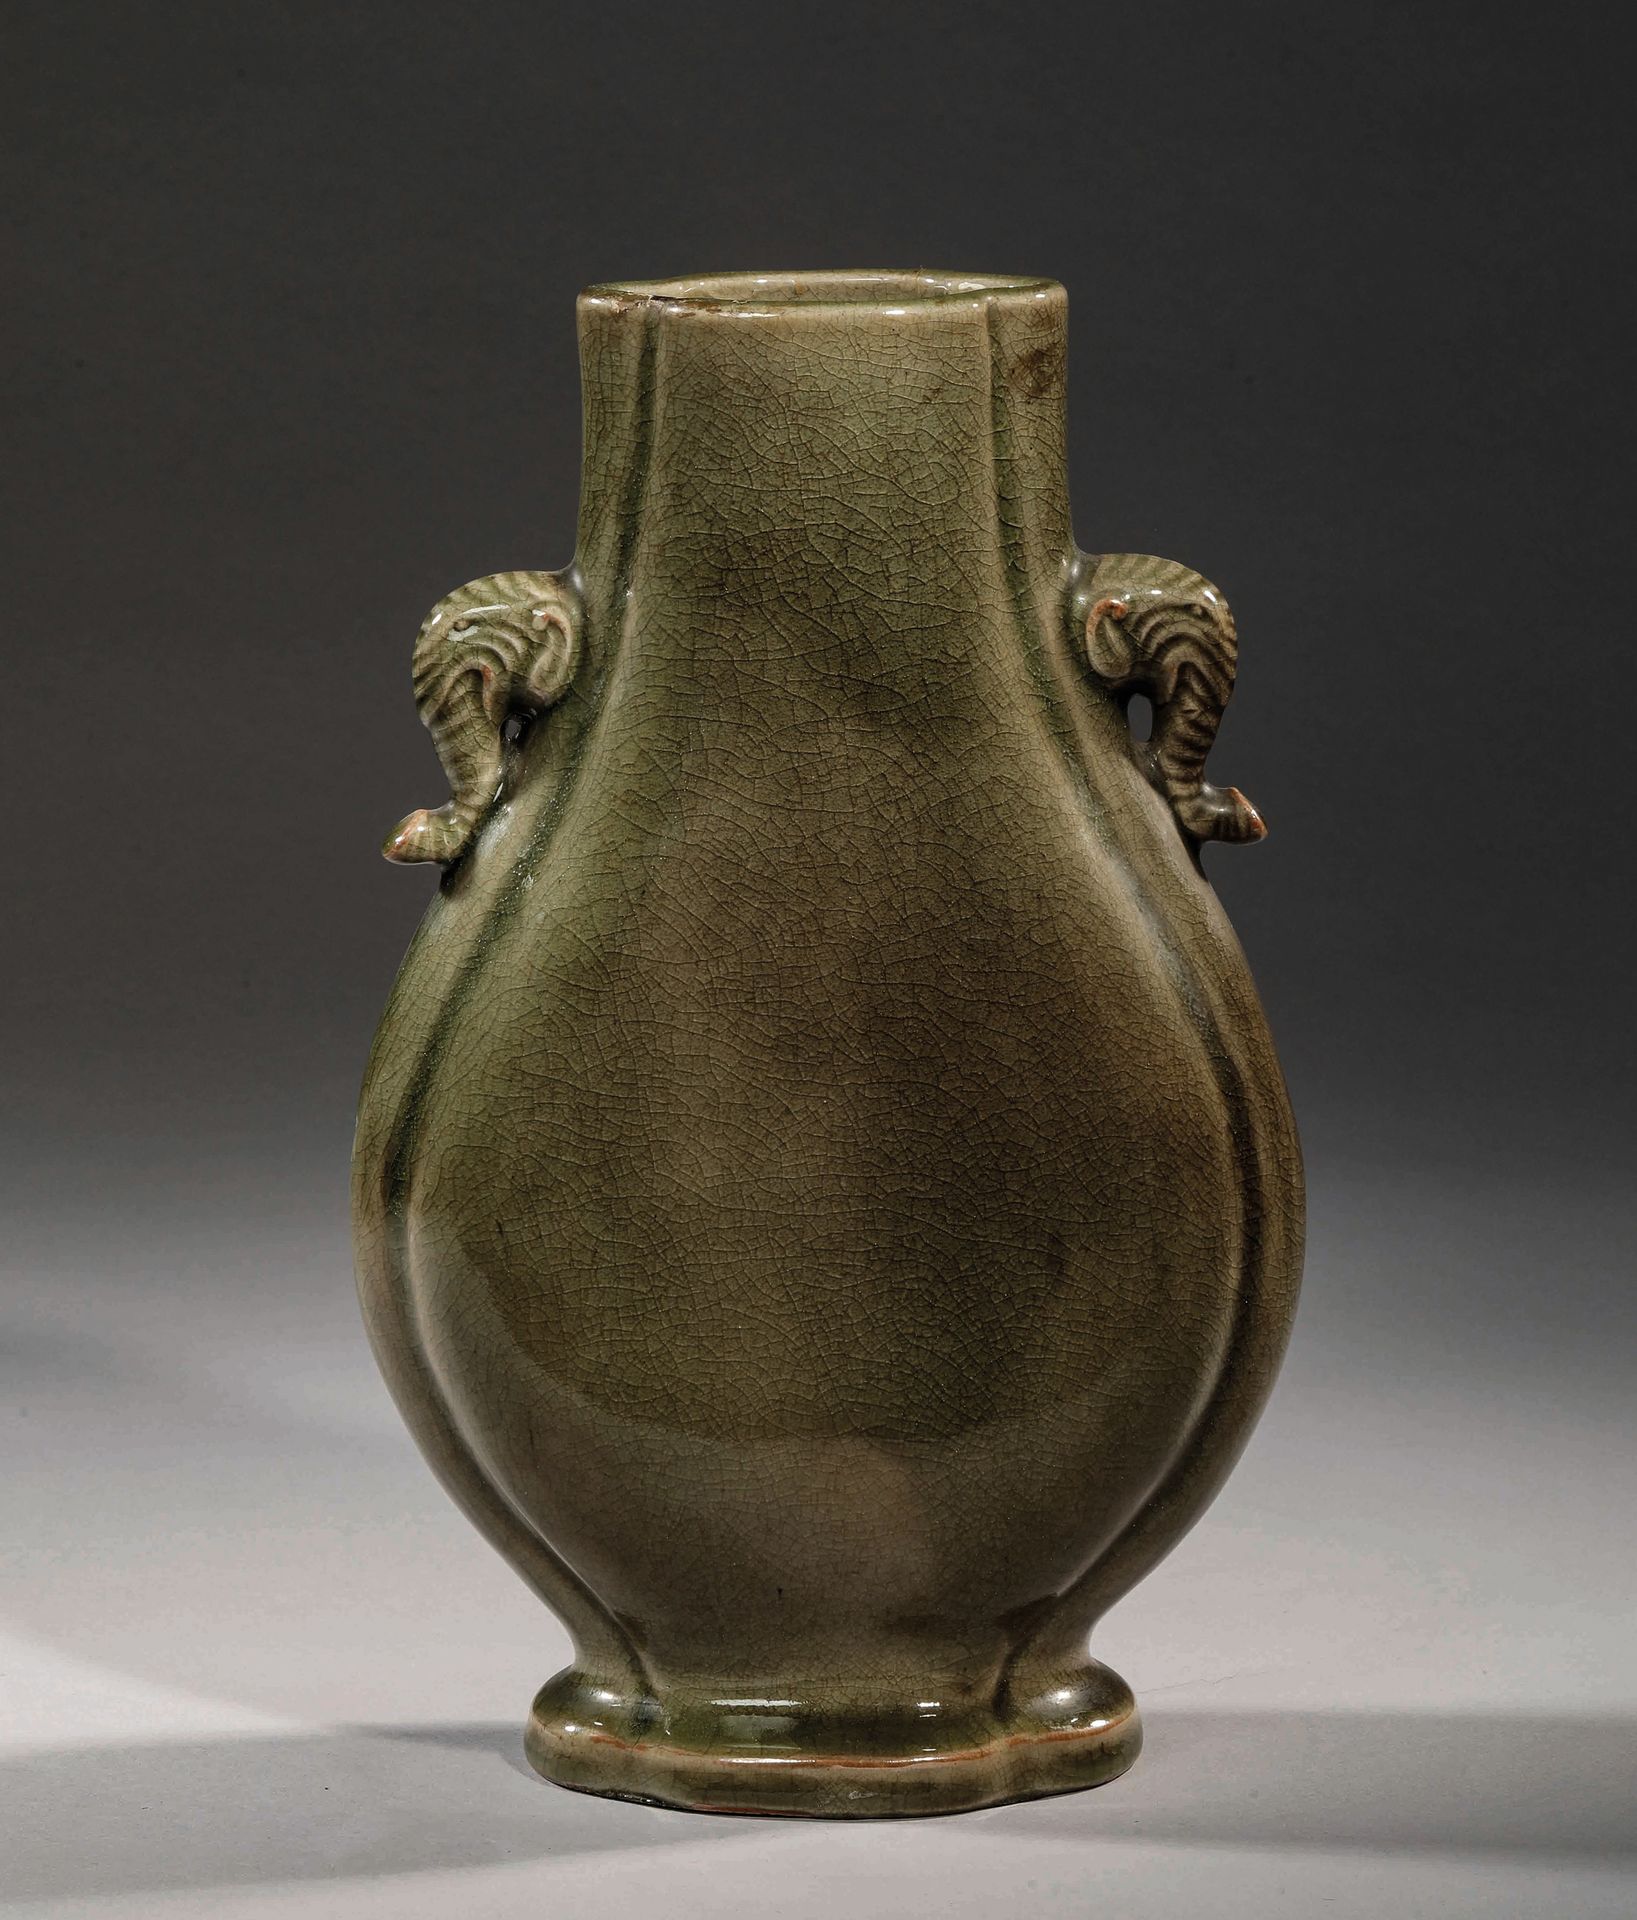 Null VASE in green celadon porcelain,
with handles in the shape of an elephant.
&hellip;